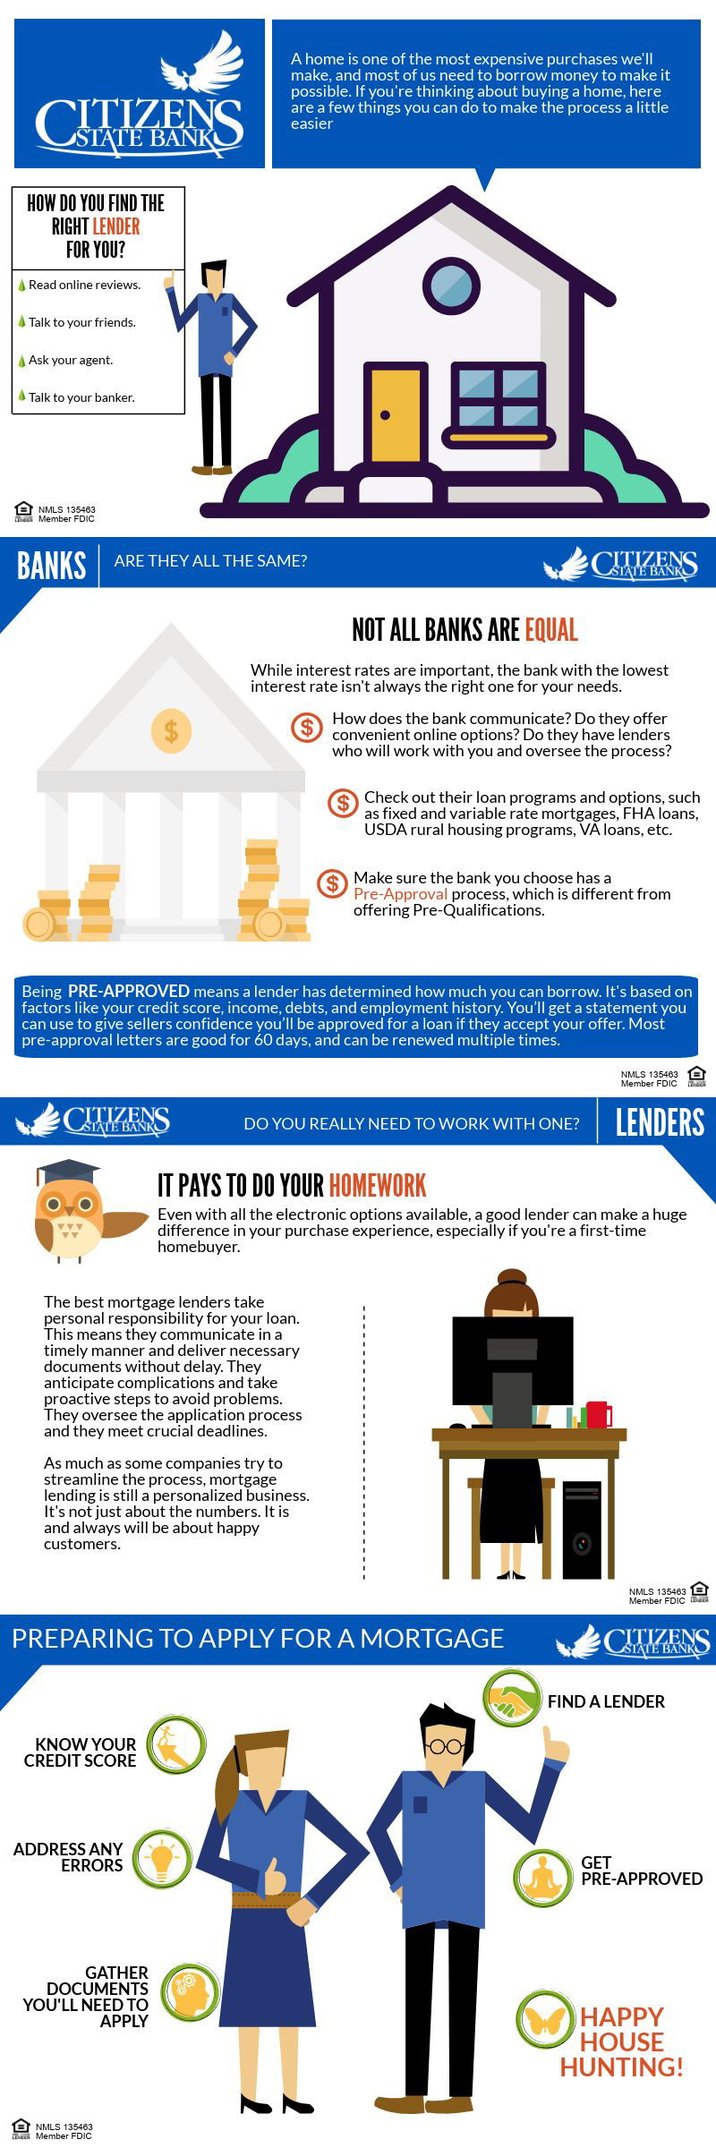 applying-for-mortgage-infographic-without-logo-1